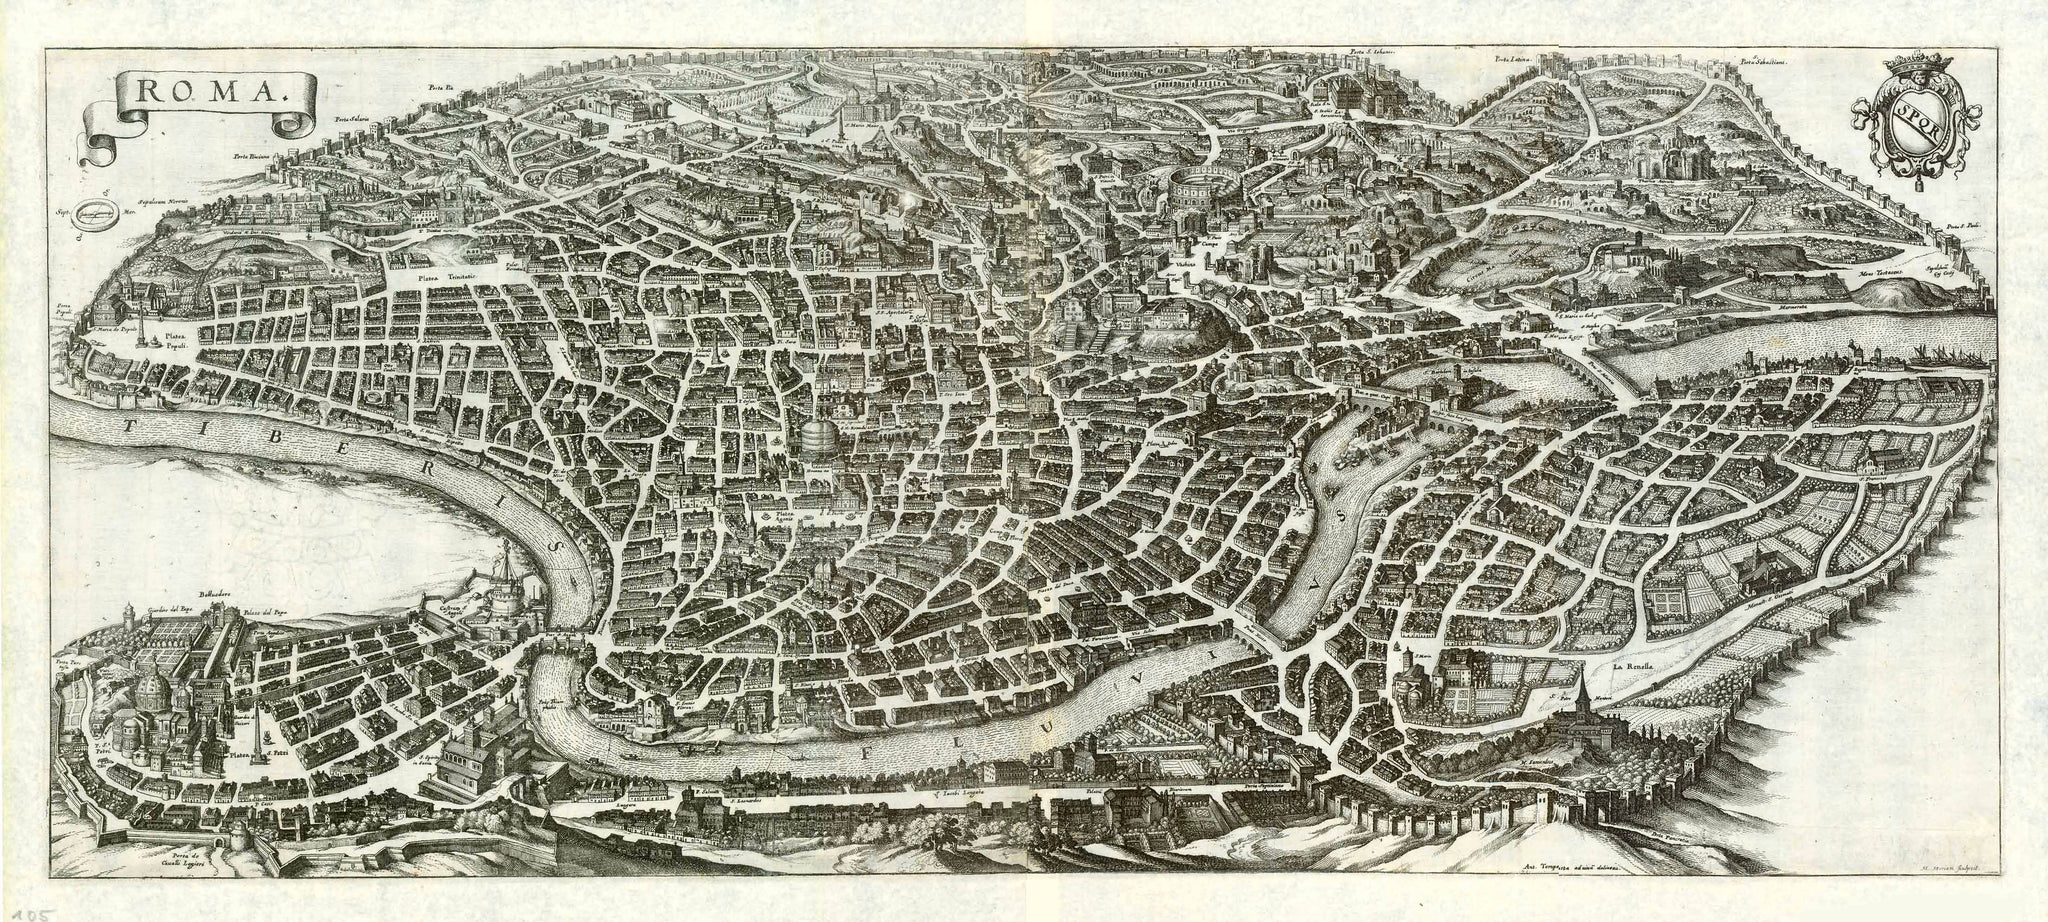 Rome. - "Roma"  Copper etching   Published in "Topographia Italiae".  Publisher: Matthaeus Merian heirs  Frankfurt on the Main, 1688.   An impressive extra large bird's eye view of the Eternal City of Rome in the 17th century.